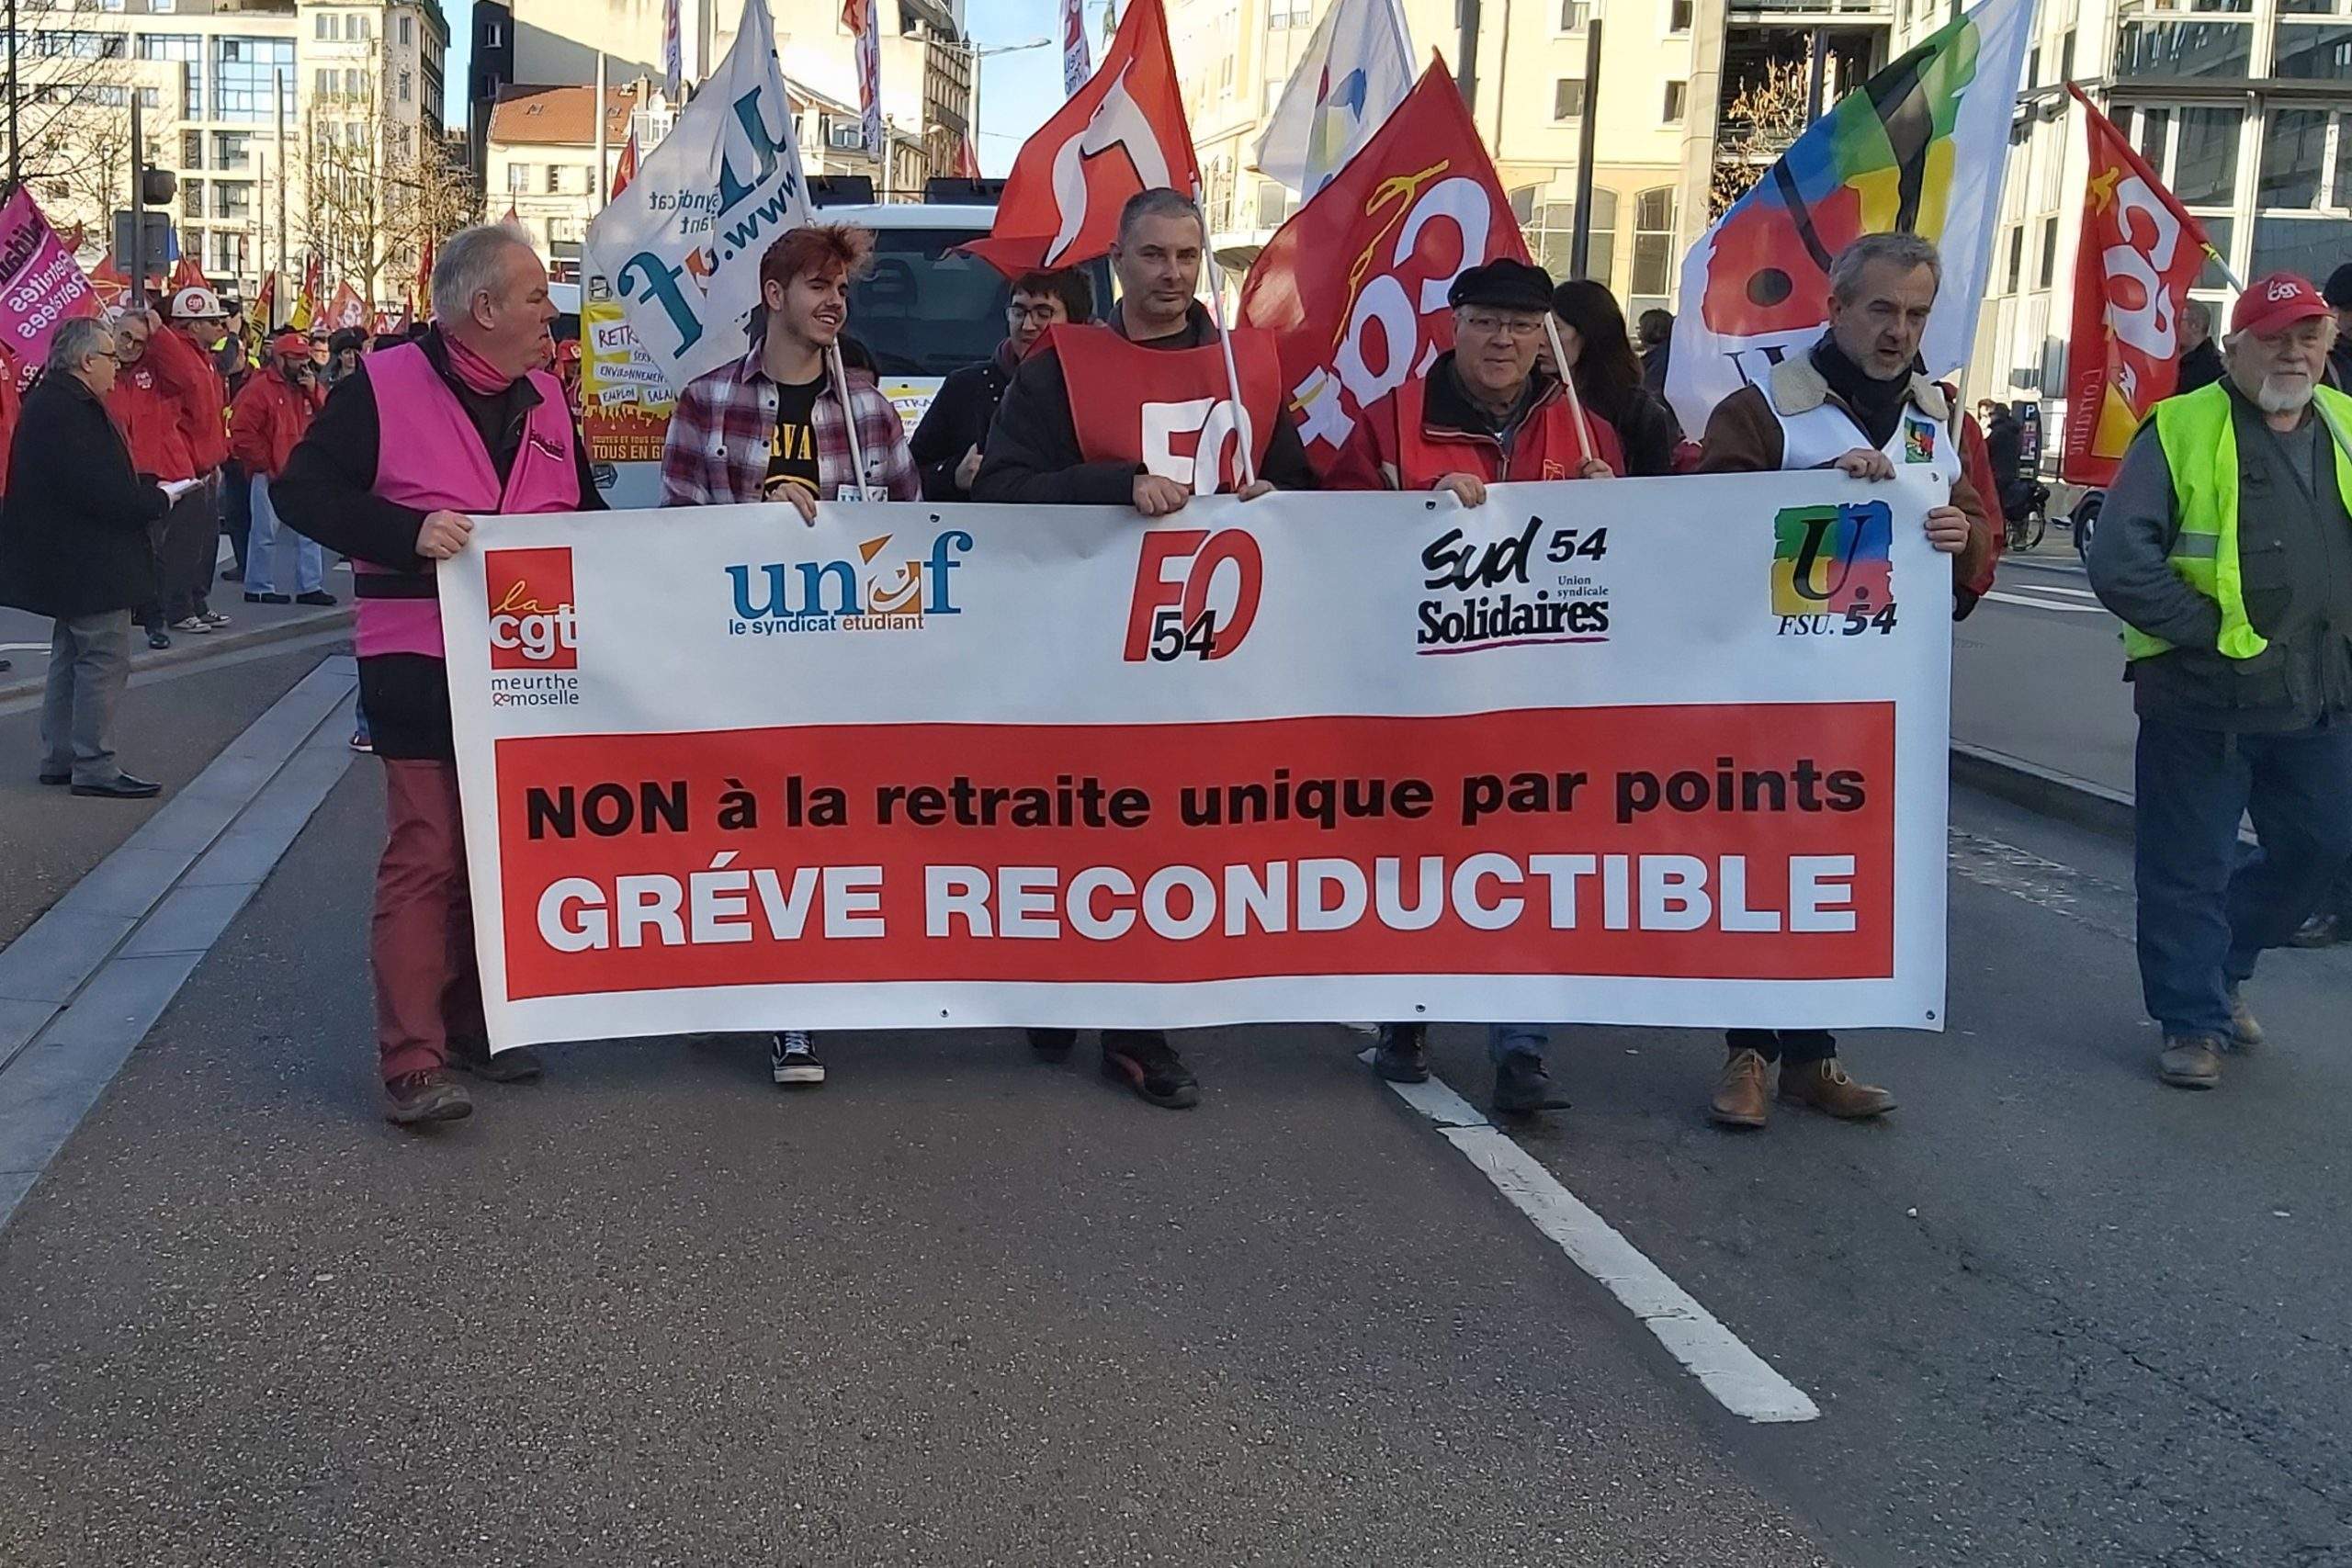 About 3,000 people demonstrated against the pension reform on 16 January 2020 in Nancy (DR)